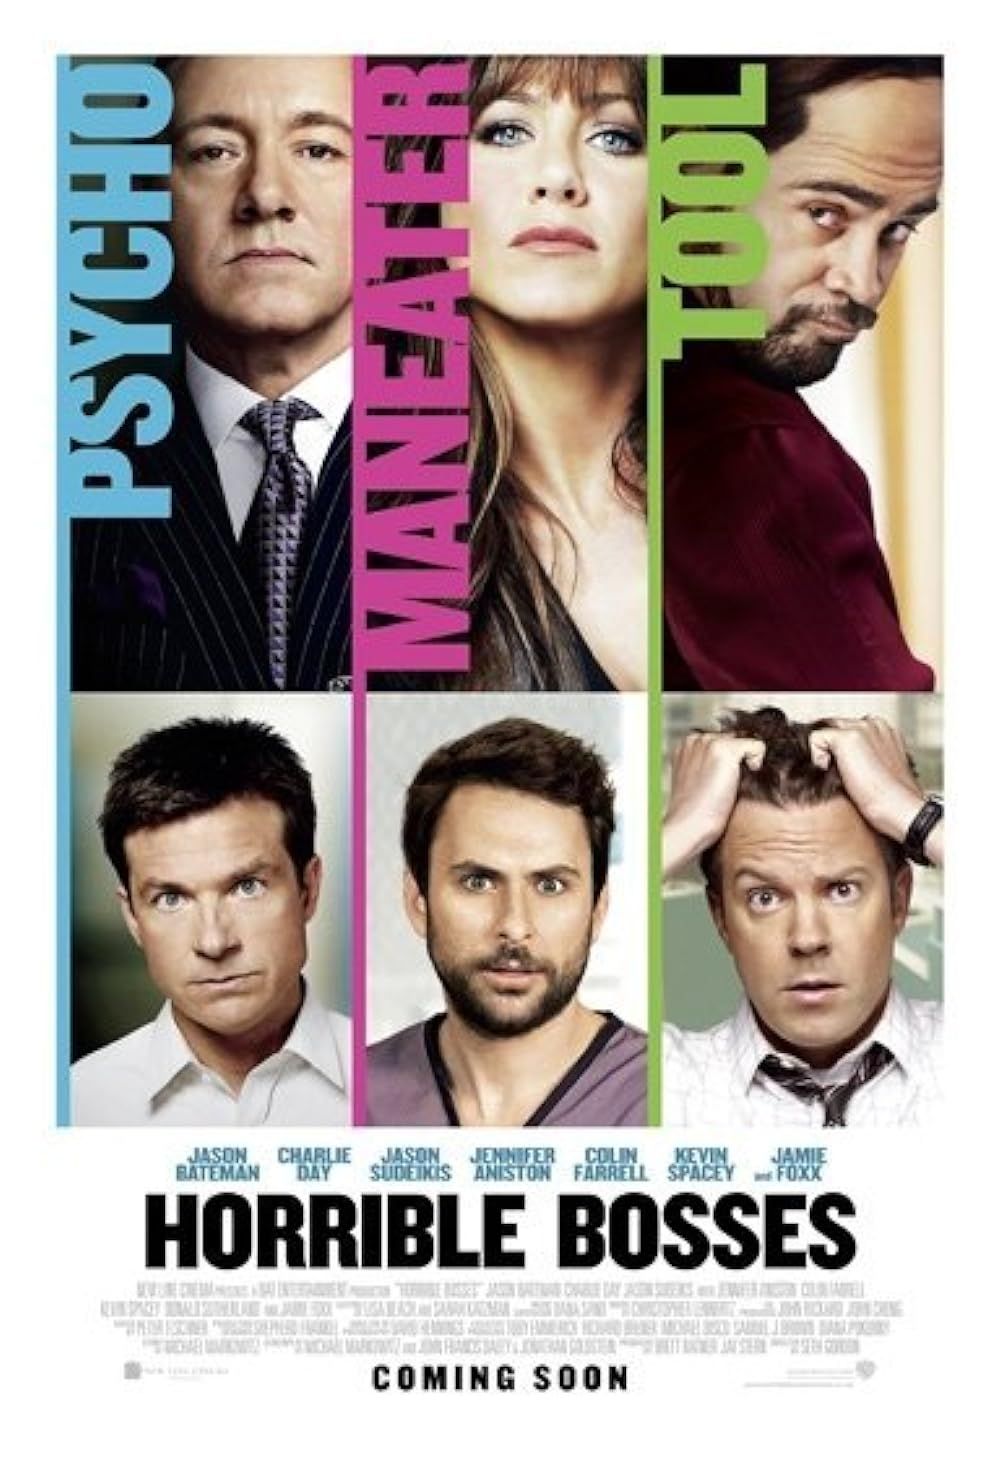 Jennifer Aniston, Kevin Spacey, Jason Bateman, Charlie Day, Colin Farrell, and Jason Sudeikis in Horrible Bosses (2011)